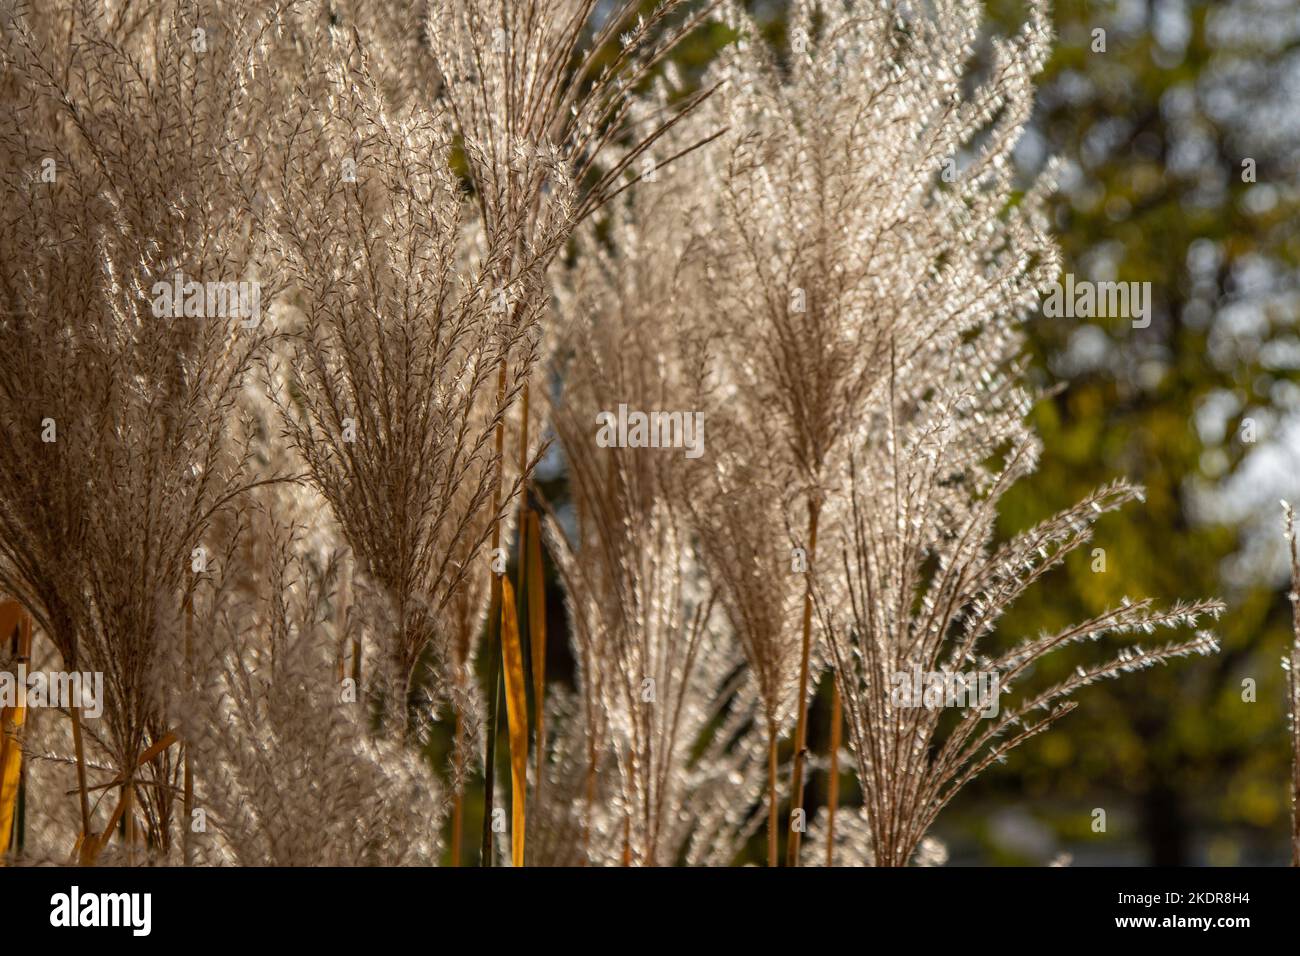 Plant Miscanthus or silvergrass. Cereal plant in the garden. Lush panicles of a flower. Botany. Floridulus, Pacific Island sacchariflorus Amur Korean muluksae, Chinese fairy grass Susuki Grass poaceae Stock Photo